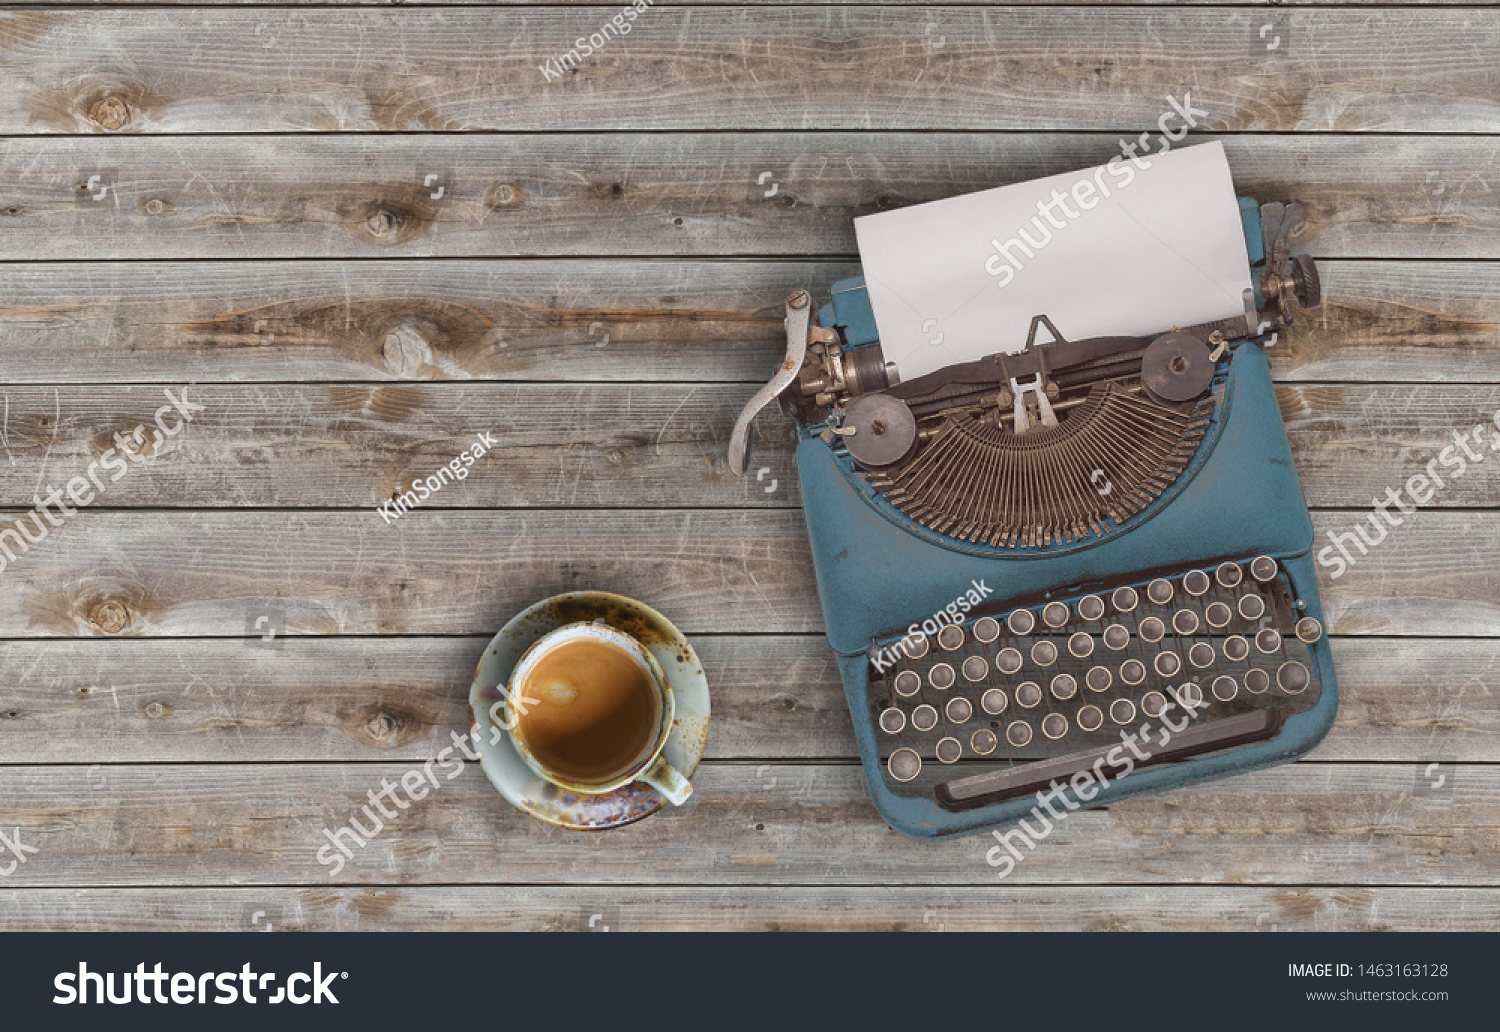 top view photo of vintage typewriter with blank page next to cup of coffee, on wooden table. #1463163128